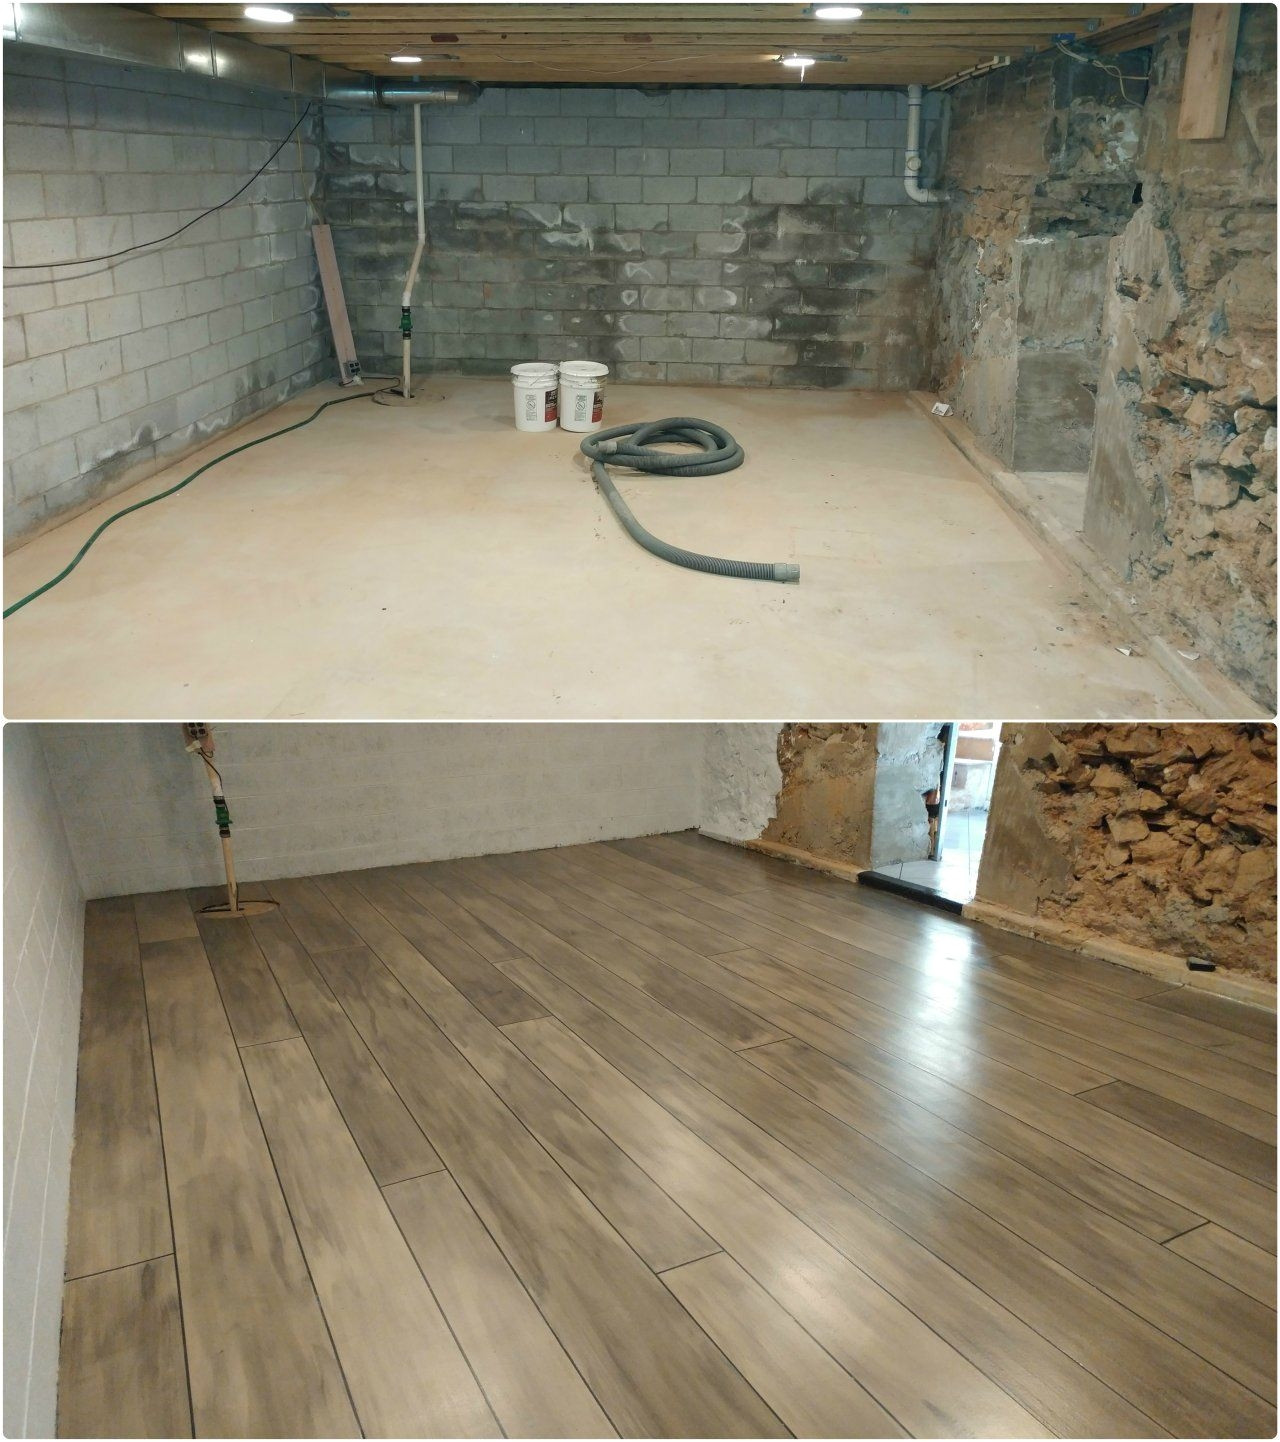 pictures of acacia hardwood floors of best wood flooring for concrete slab bradshomefurnishings for best wood flooring for concrete slab basement refinished with concrete wood ardmore pa rustic concrete